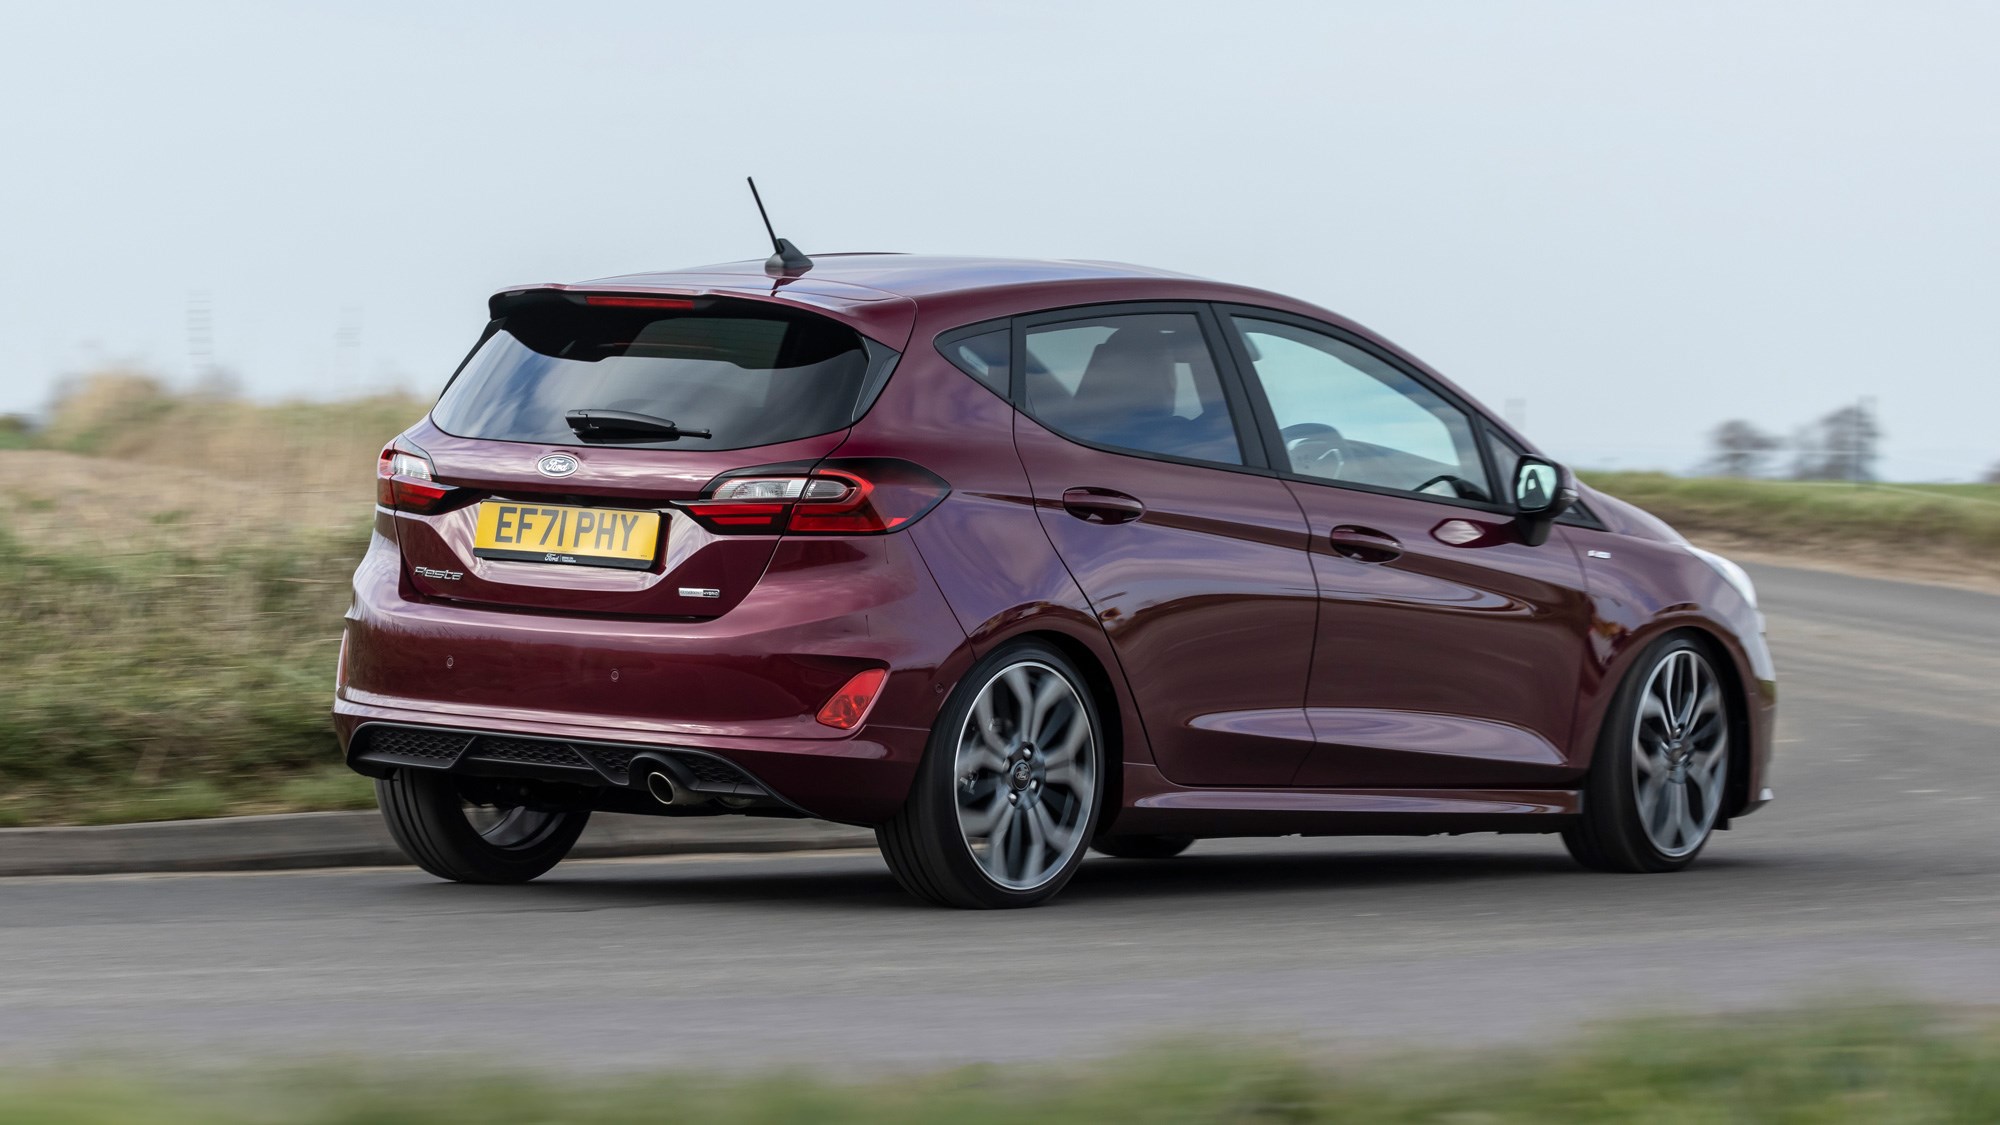 Ford Fiesta dimensions, boot space and electrification